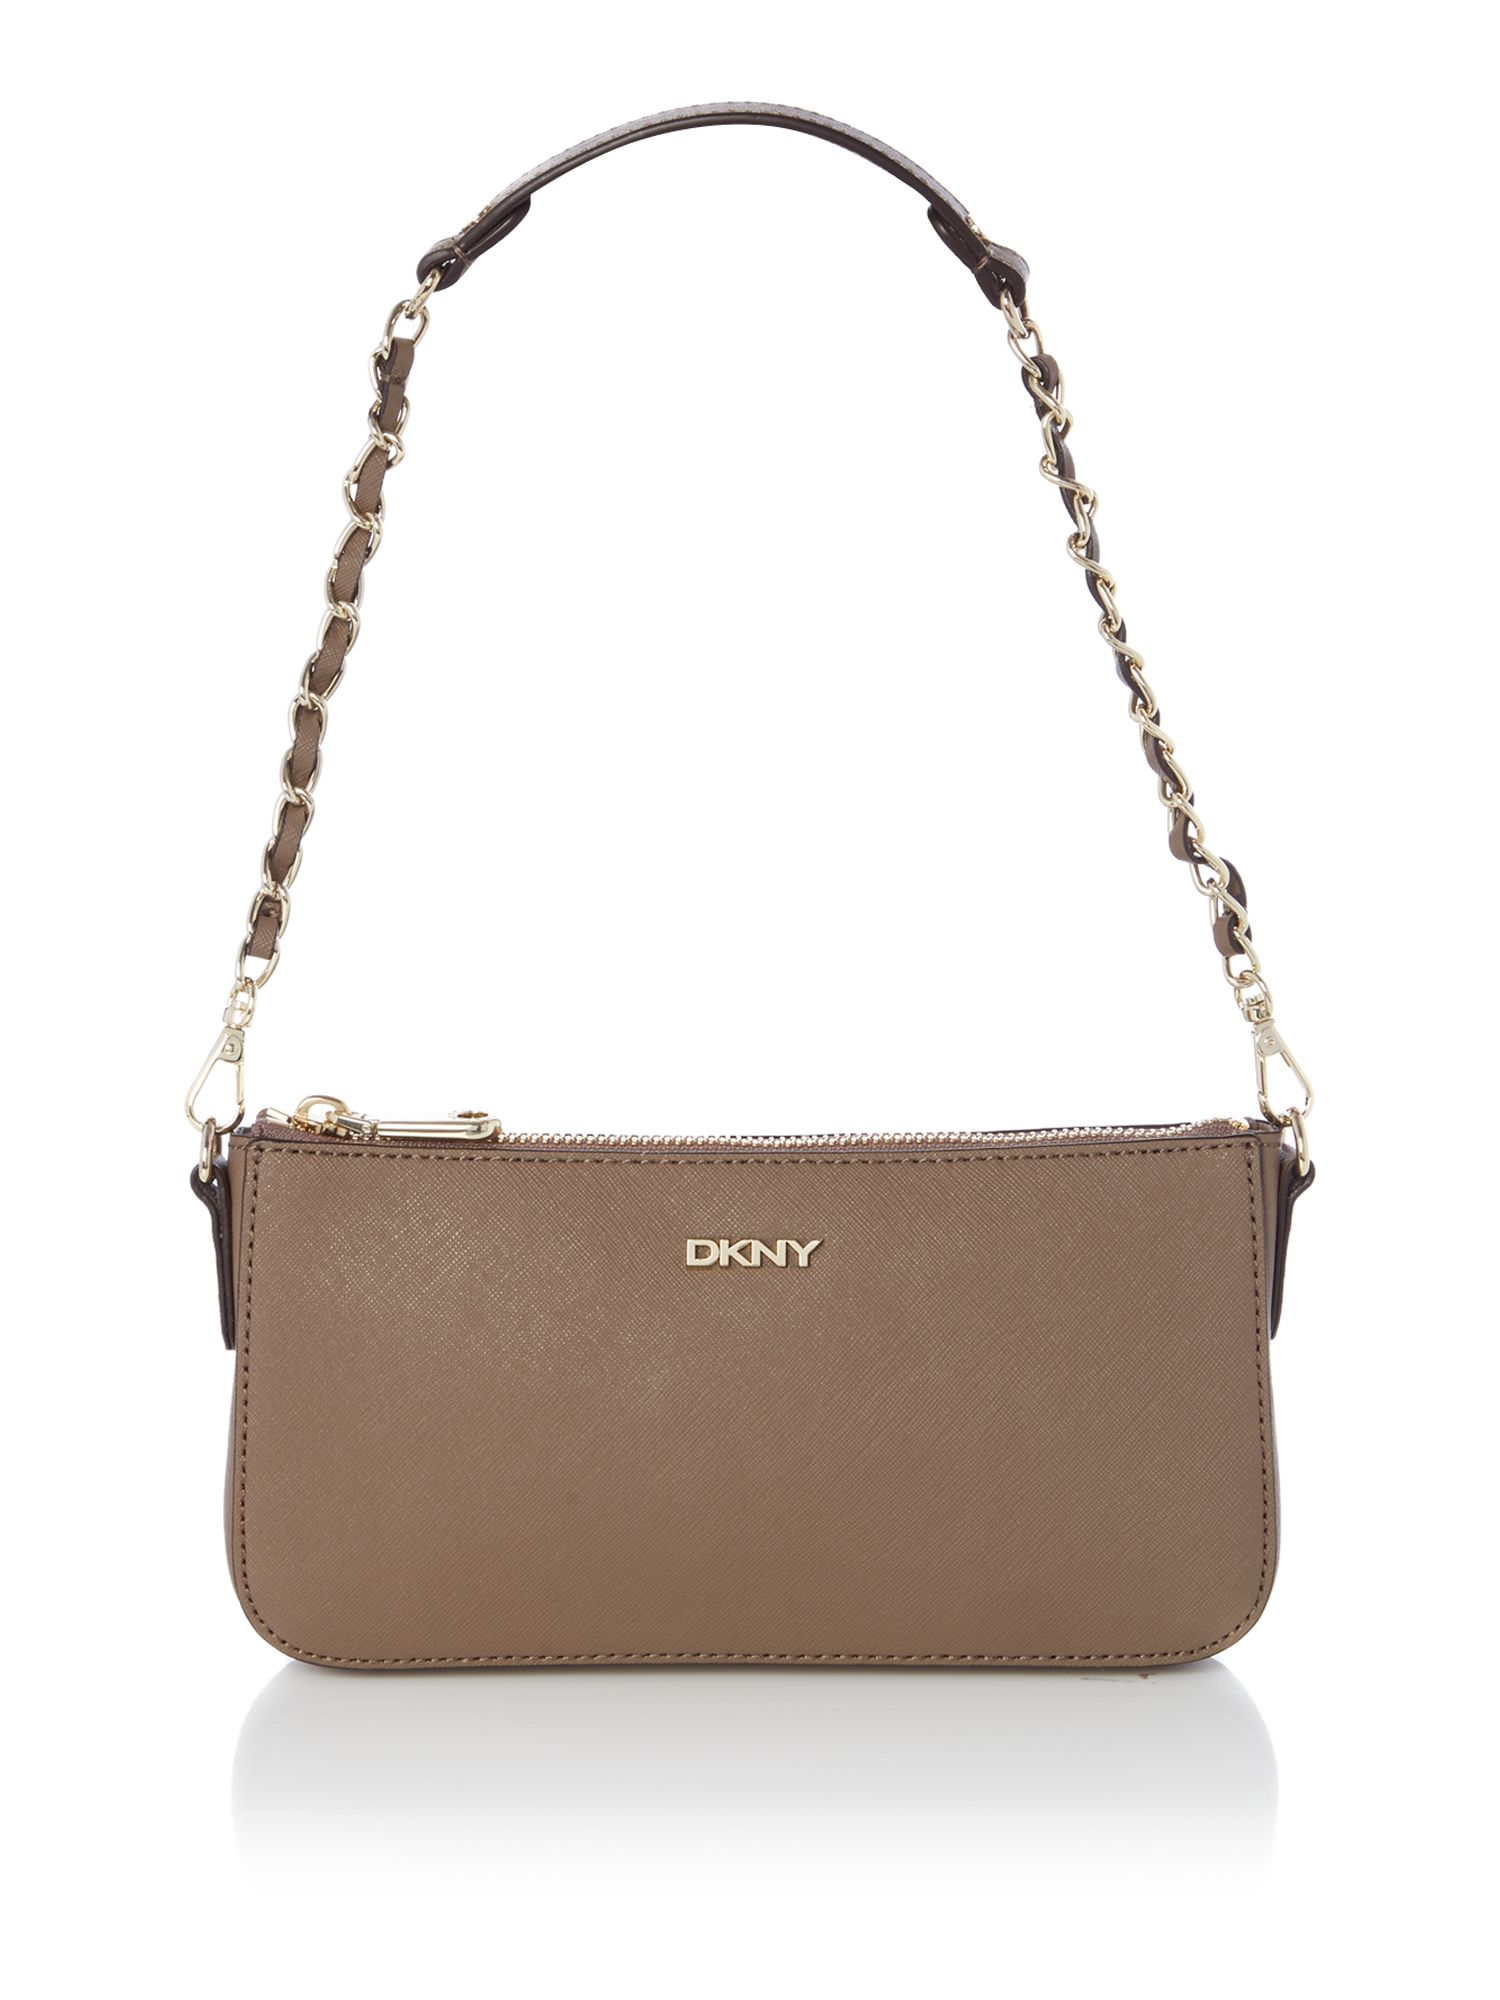 Dkny Saffiano Taupe Small Cross Body Bag in Brown | Lyst